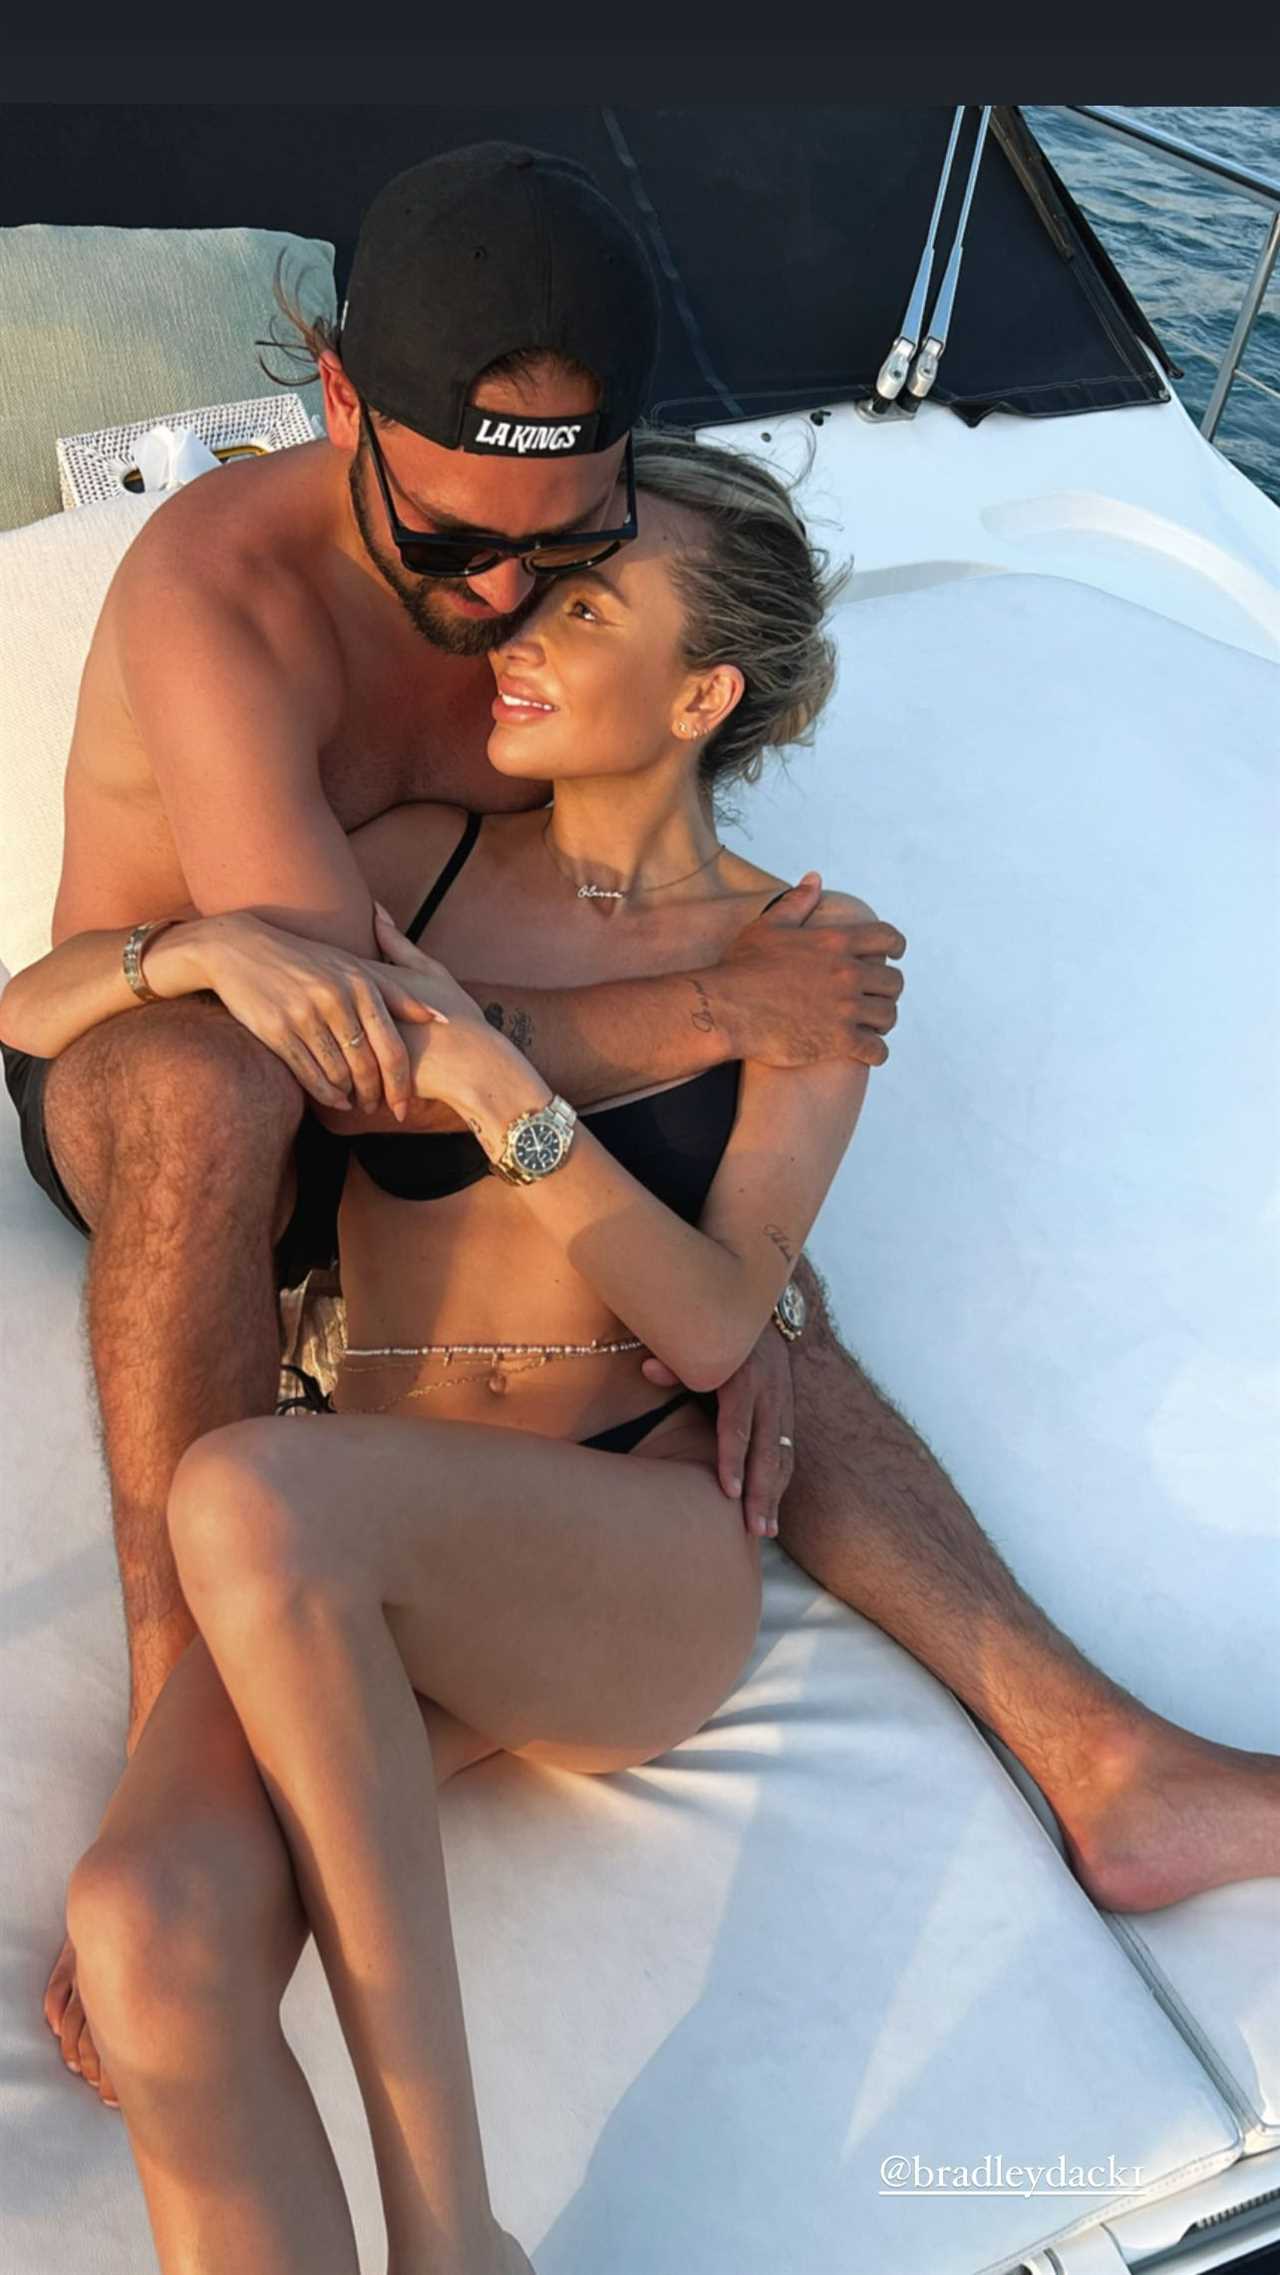 Olivia Attwood’s husband Bradley Dack ‘mortified’ after she admits spying on his stag do